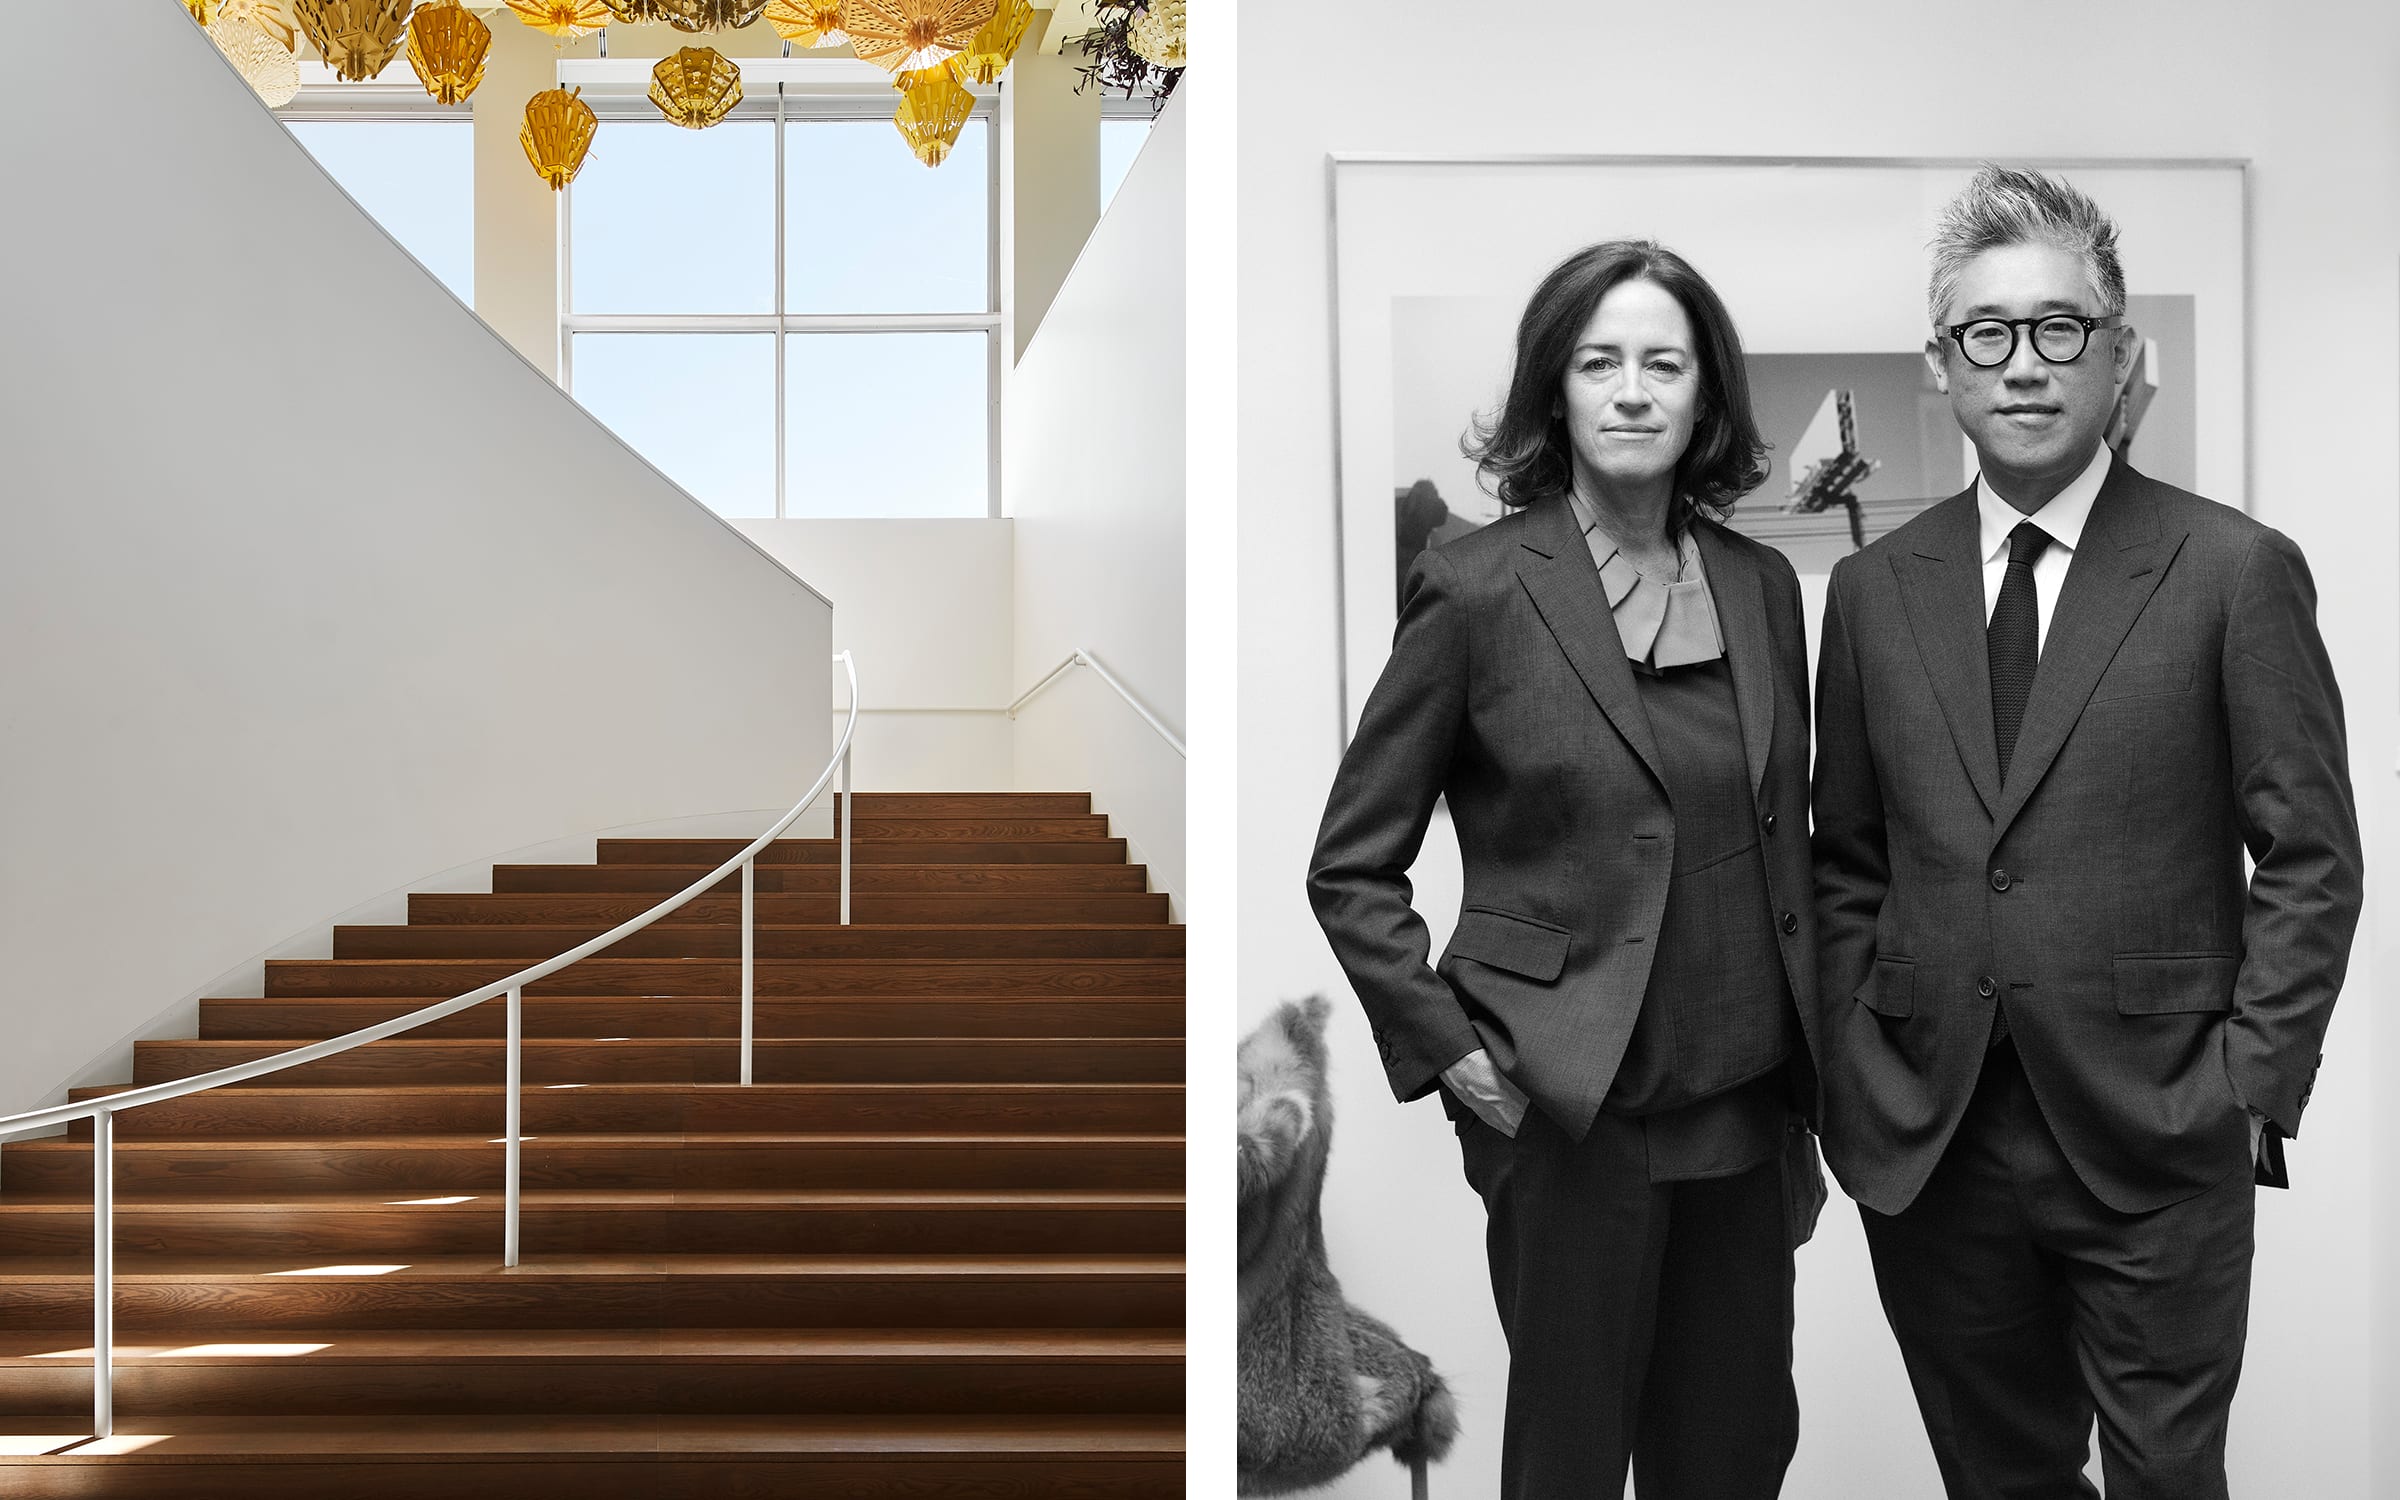 Left: Staircase at the MCA Chicago. Photograph by Kendall McCaugherty, Hall + Merrick. Courtesy of Johnston Marklee. Right: Sharon Jonston and Mark Lee. Photograph by Todd Cole. Courtesy of Johnston Marklee. 